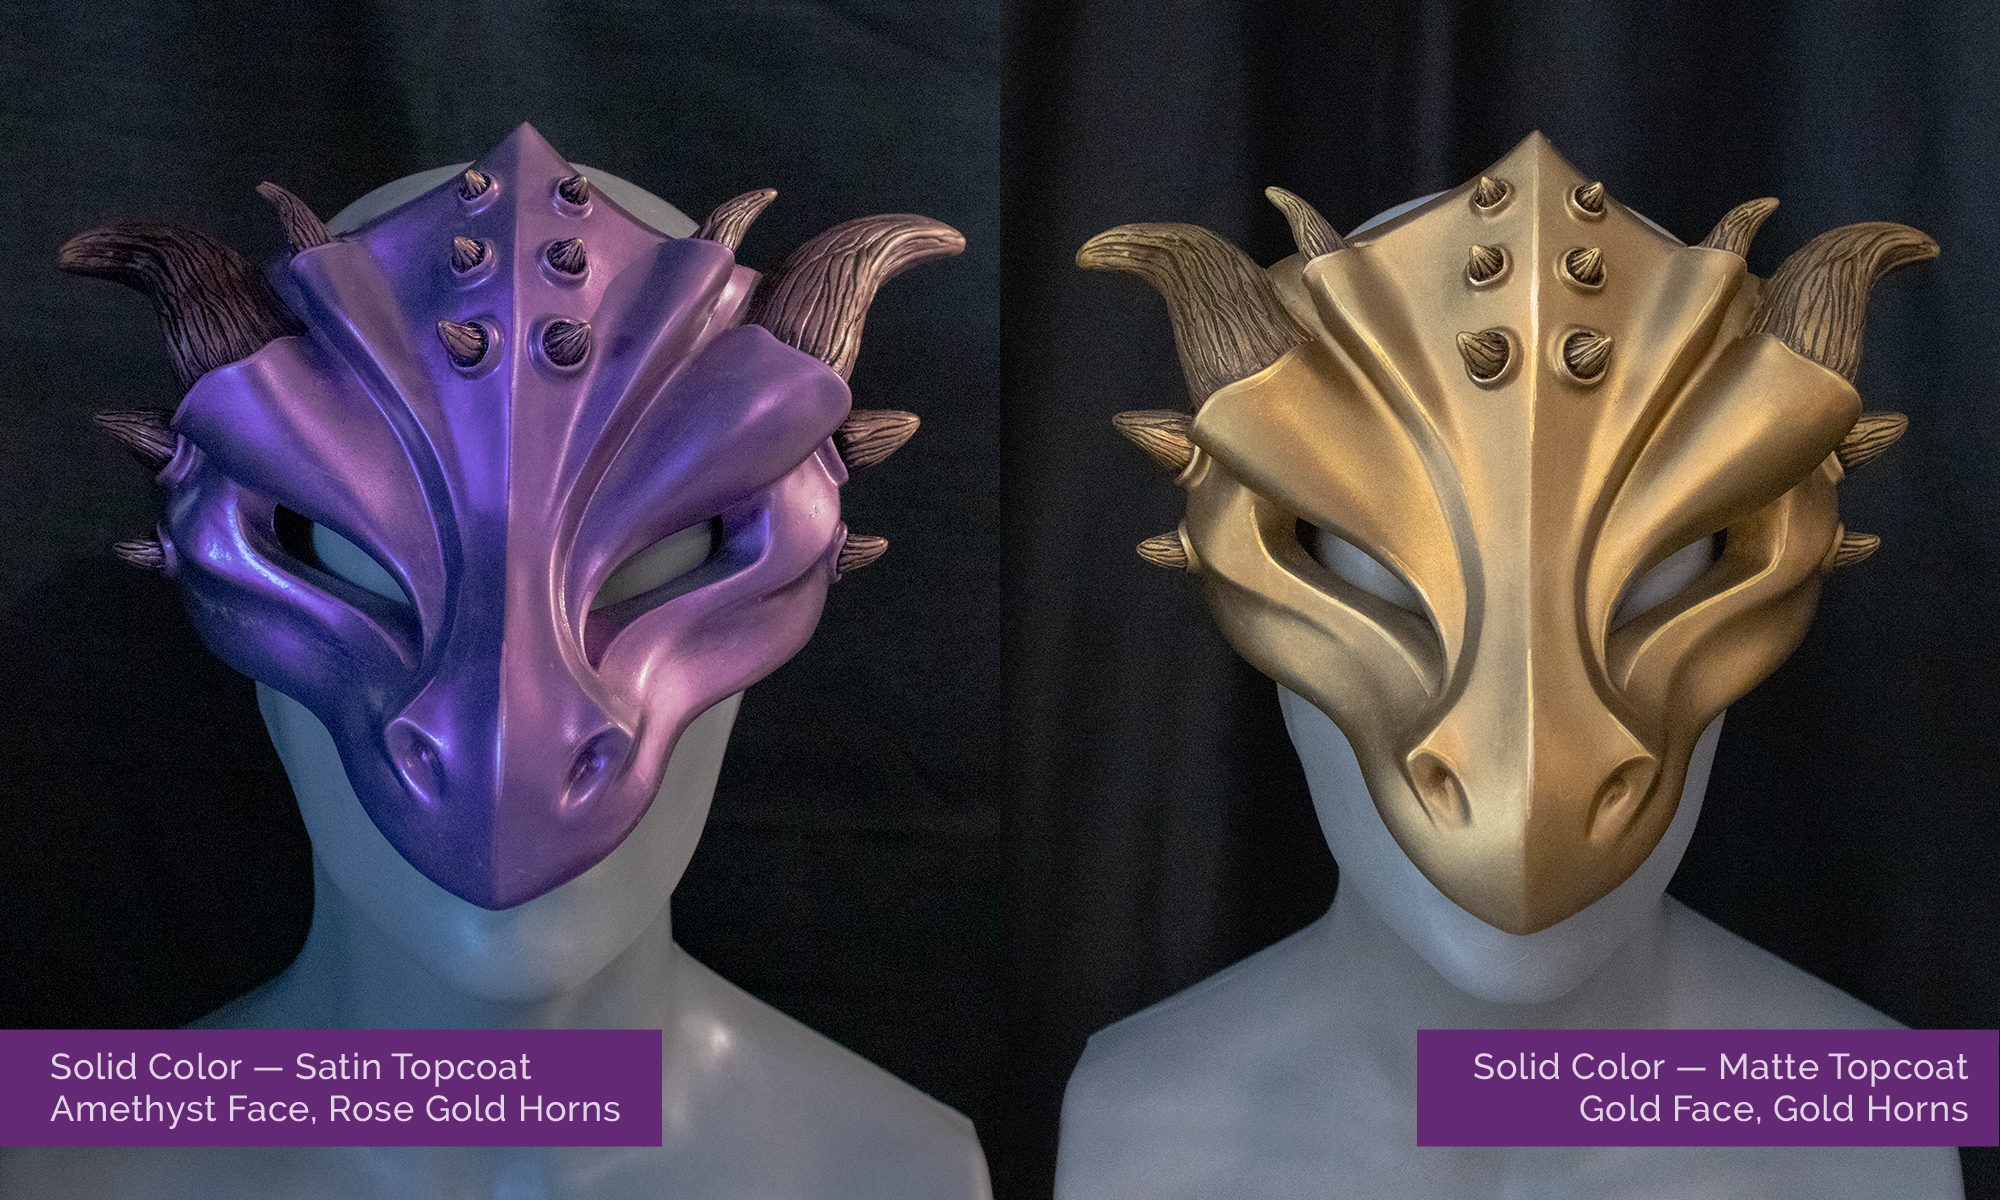 Two "solid color" custom dragon masks pictured facing forward, each tied onto a mannequin bust in front of a black background. Left caption reads: "Solid color — Satin topcoat, Amethyst face, Rose Gold horns" Right caption reads: "Solid color — Matte topcoat, Gold face, Gold horns."